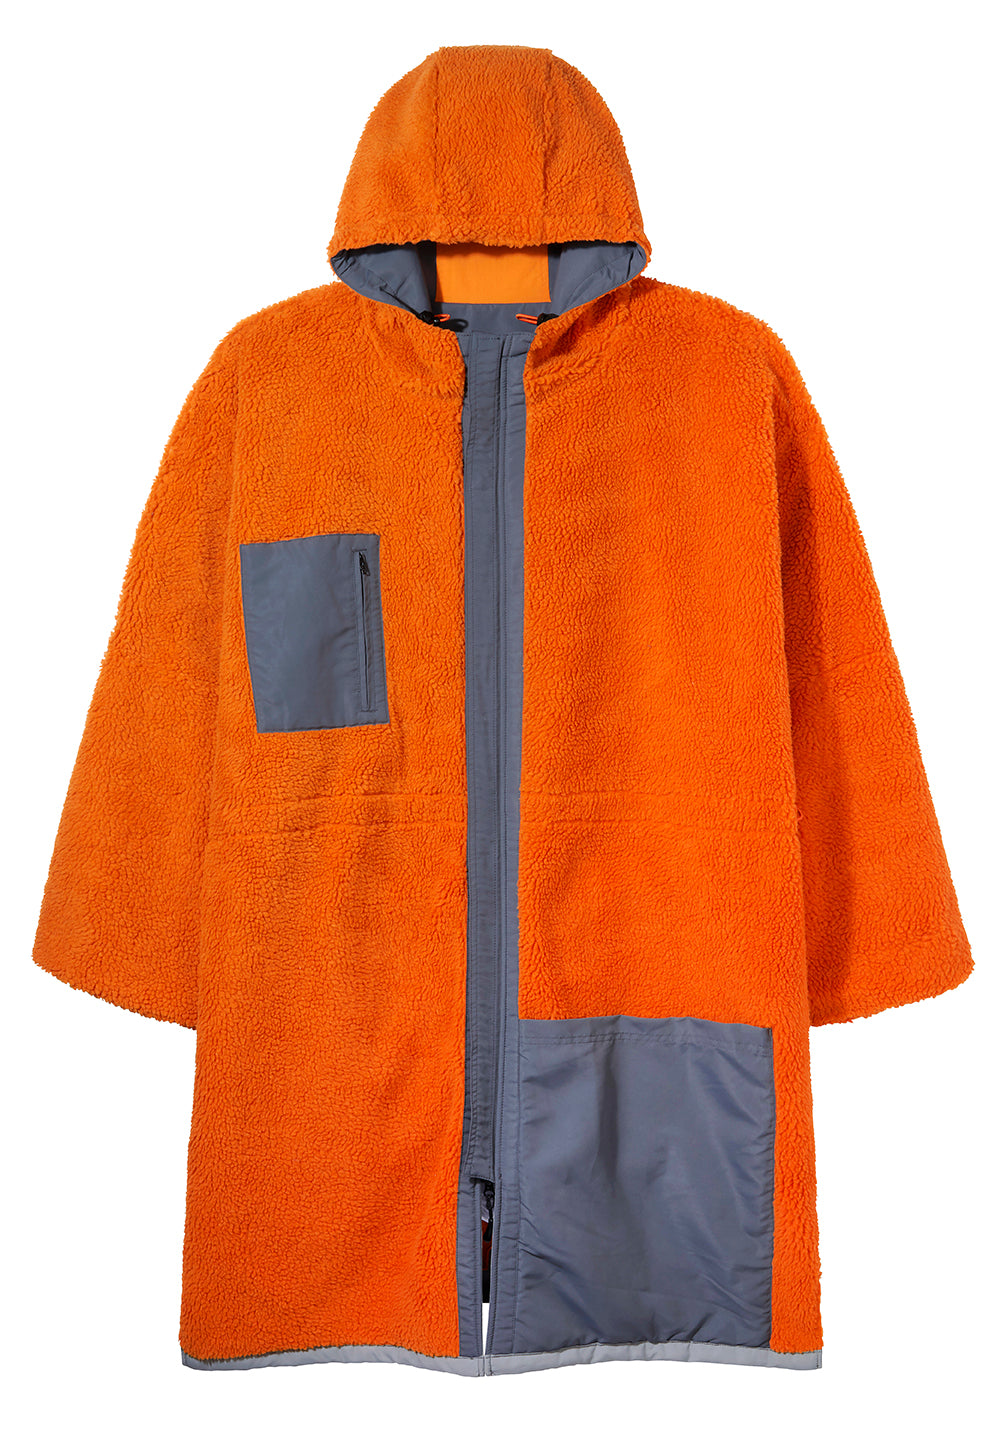 Selkie Recycled Change Parka